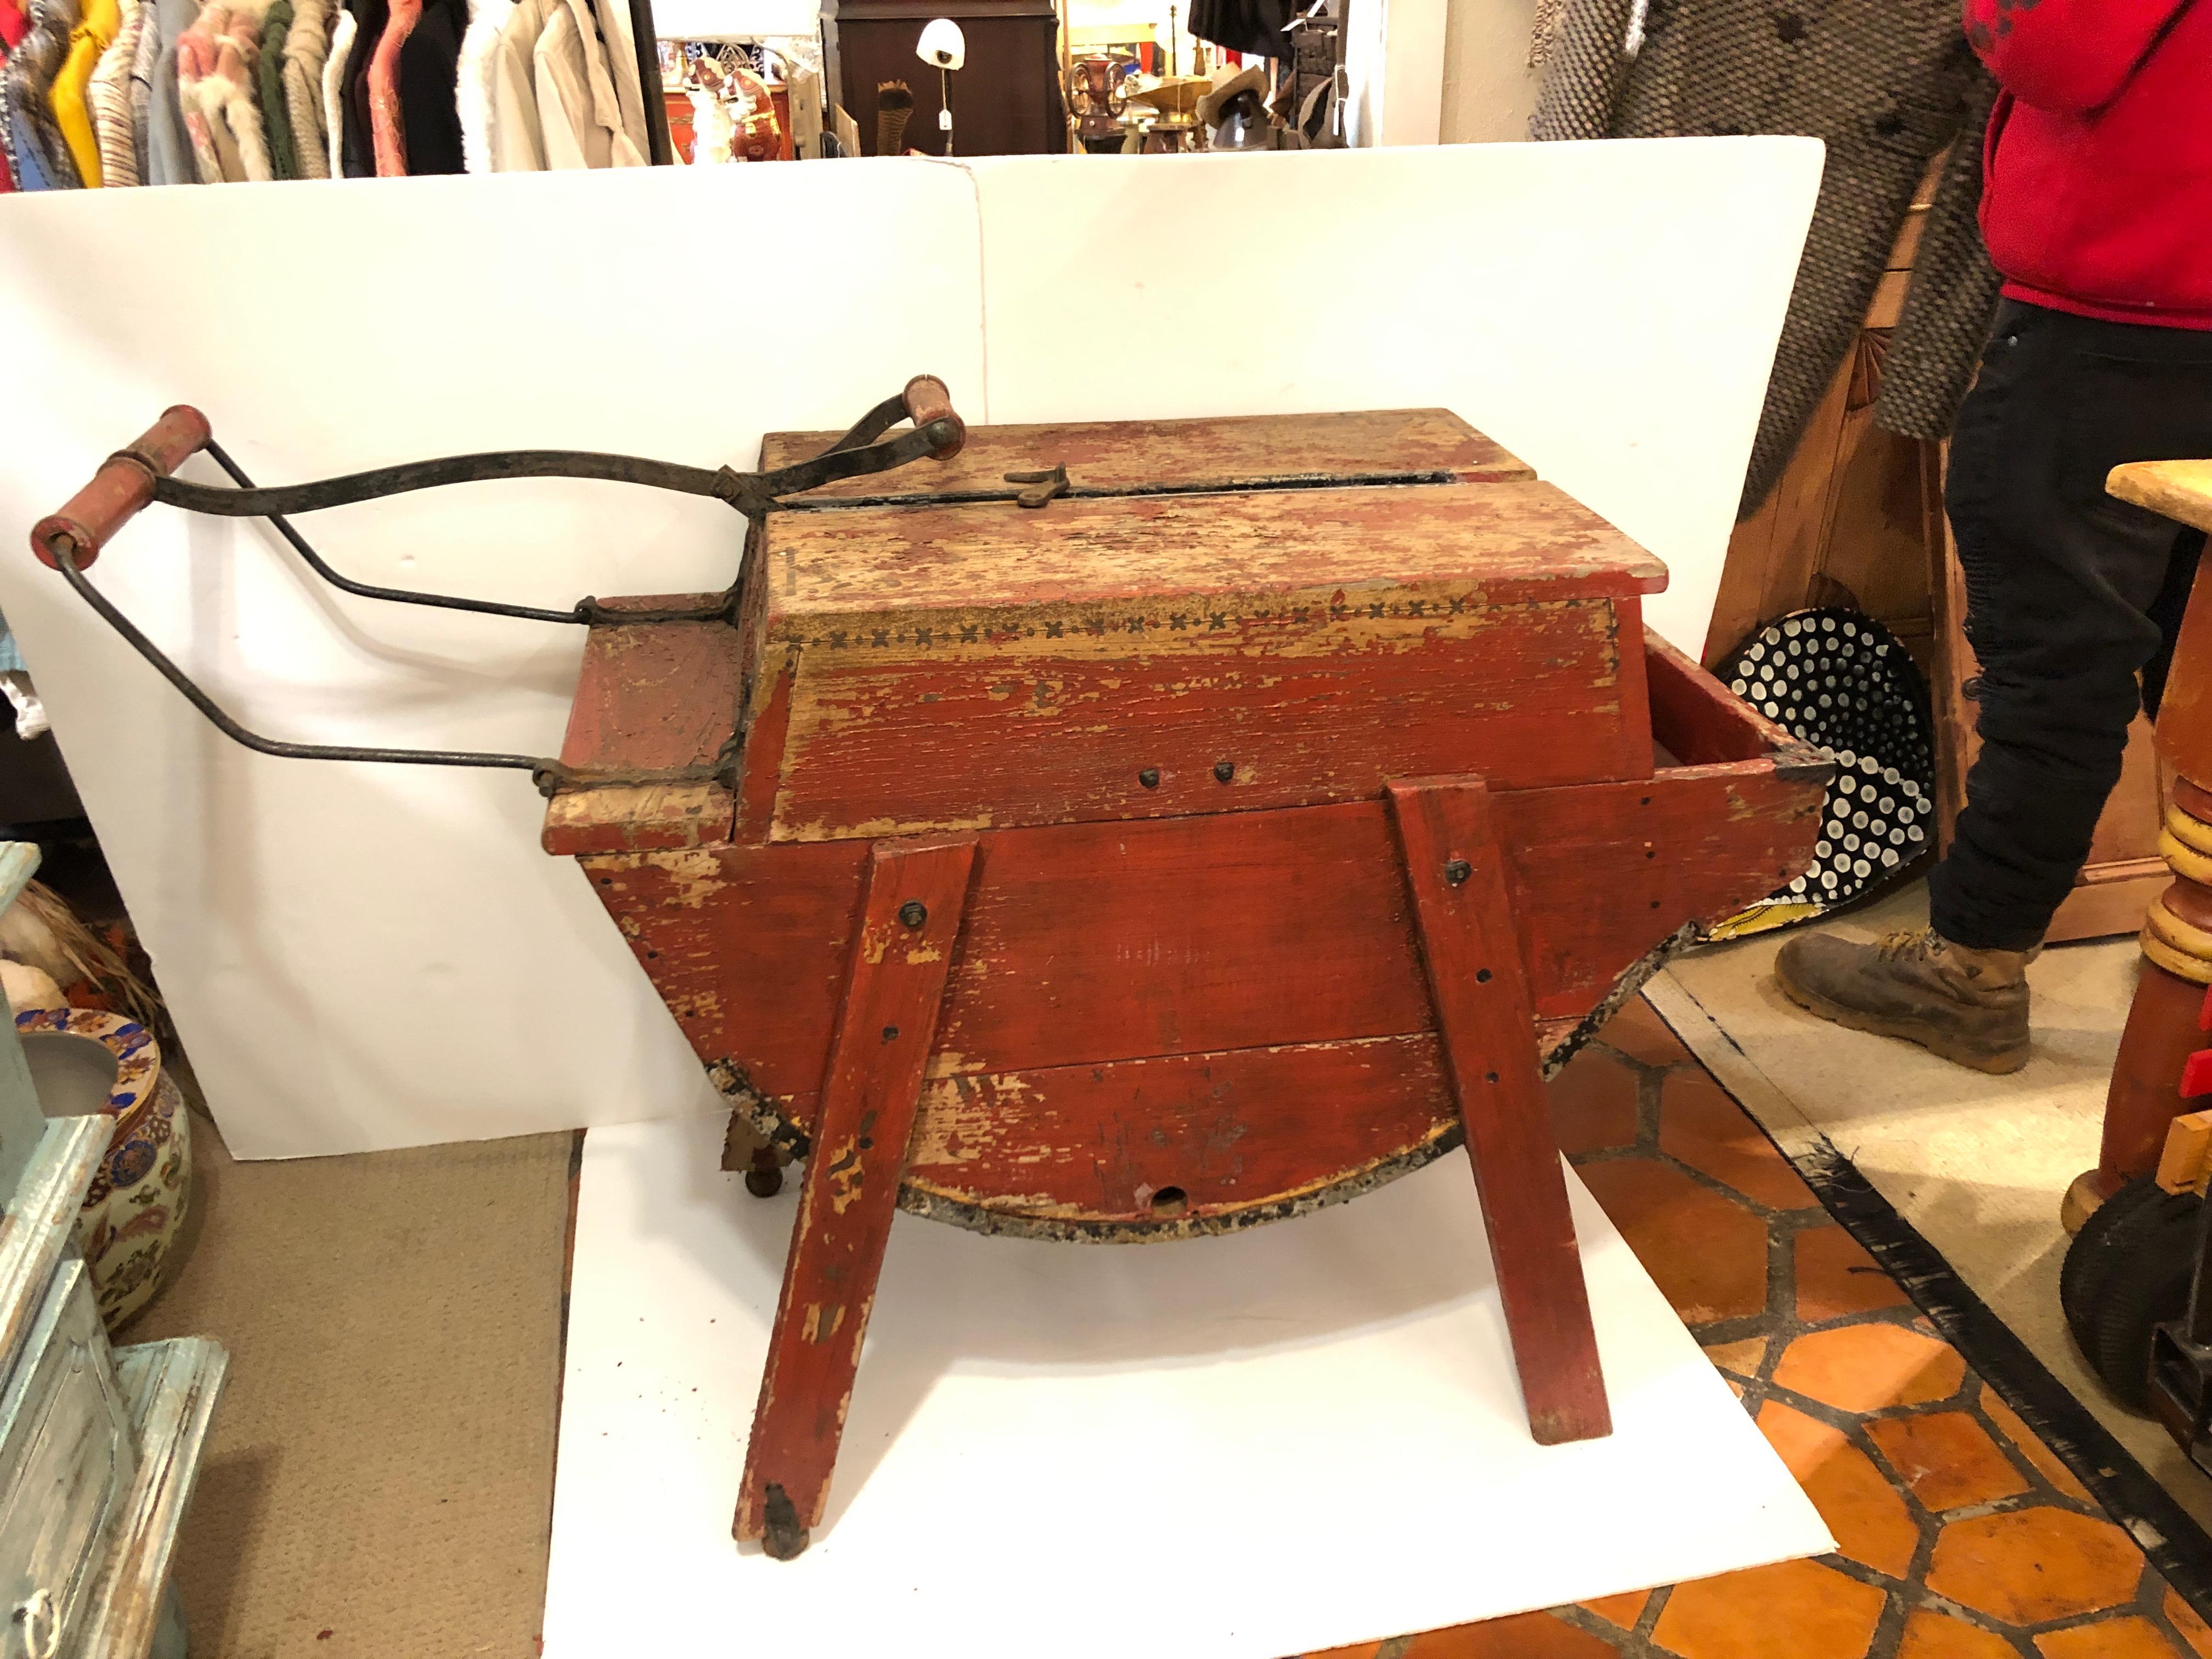 A fabulous vintage weathered red wooden washing machine that someone with imagination can use as a side table or found object that adds warmth and curiosity to a space.
Handle on left lifts up and down, protrudes 13